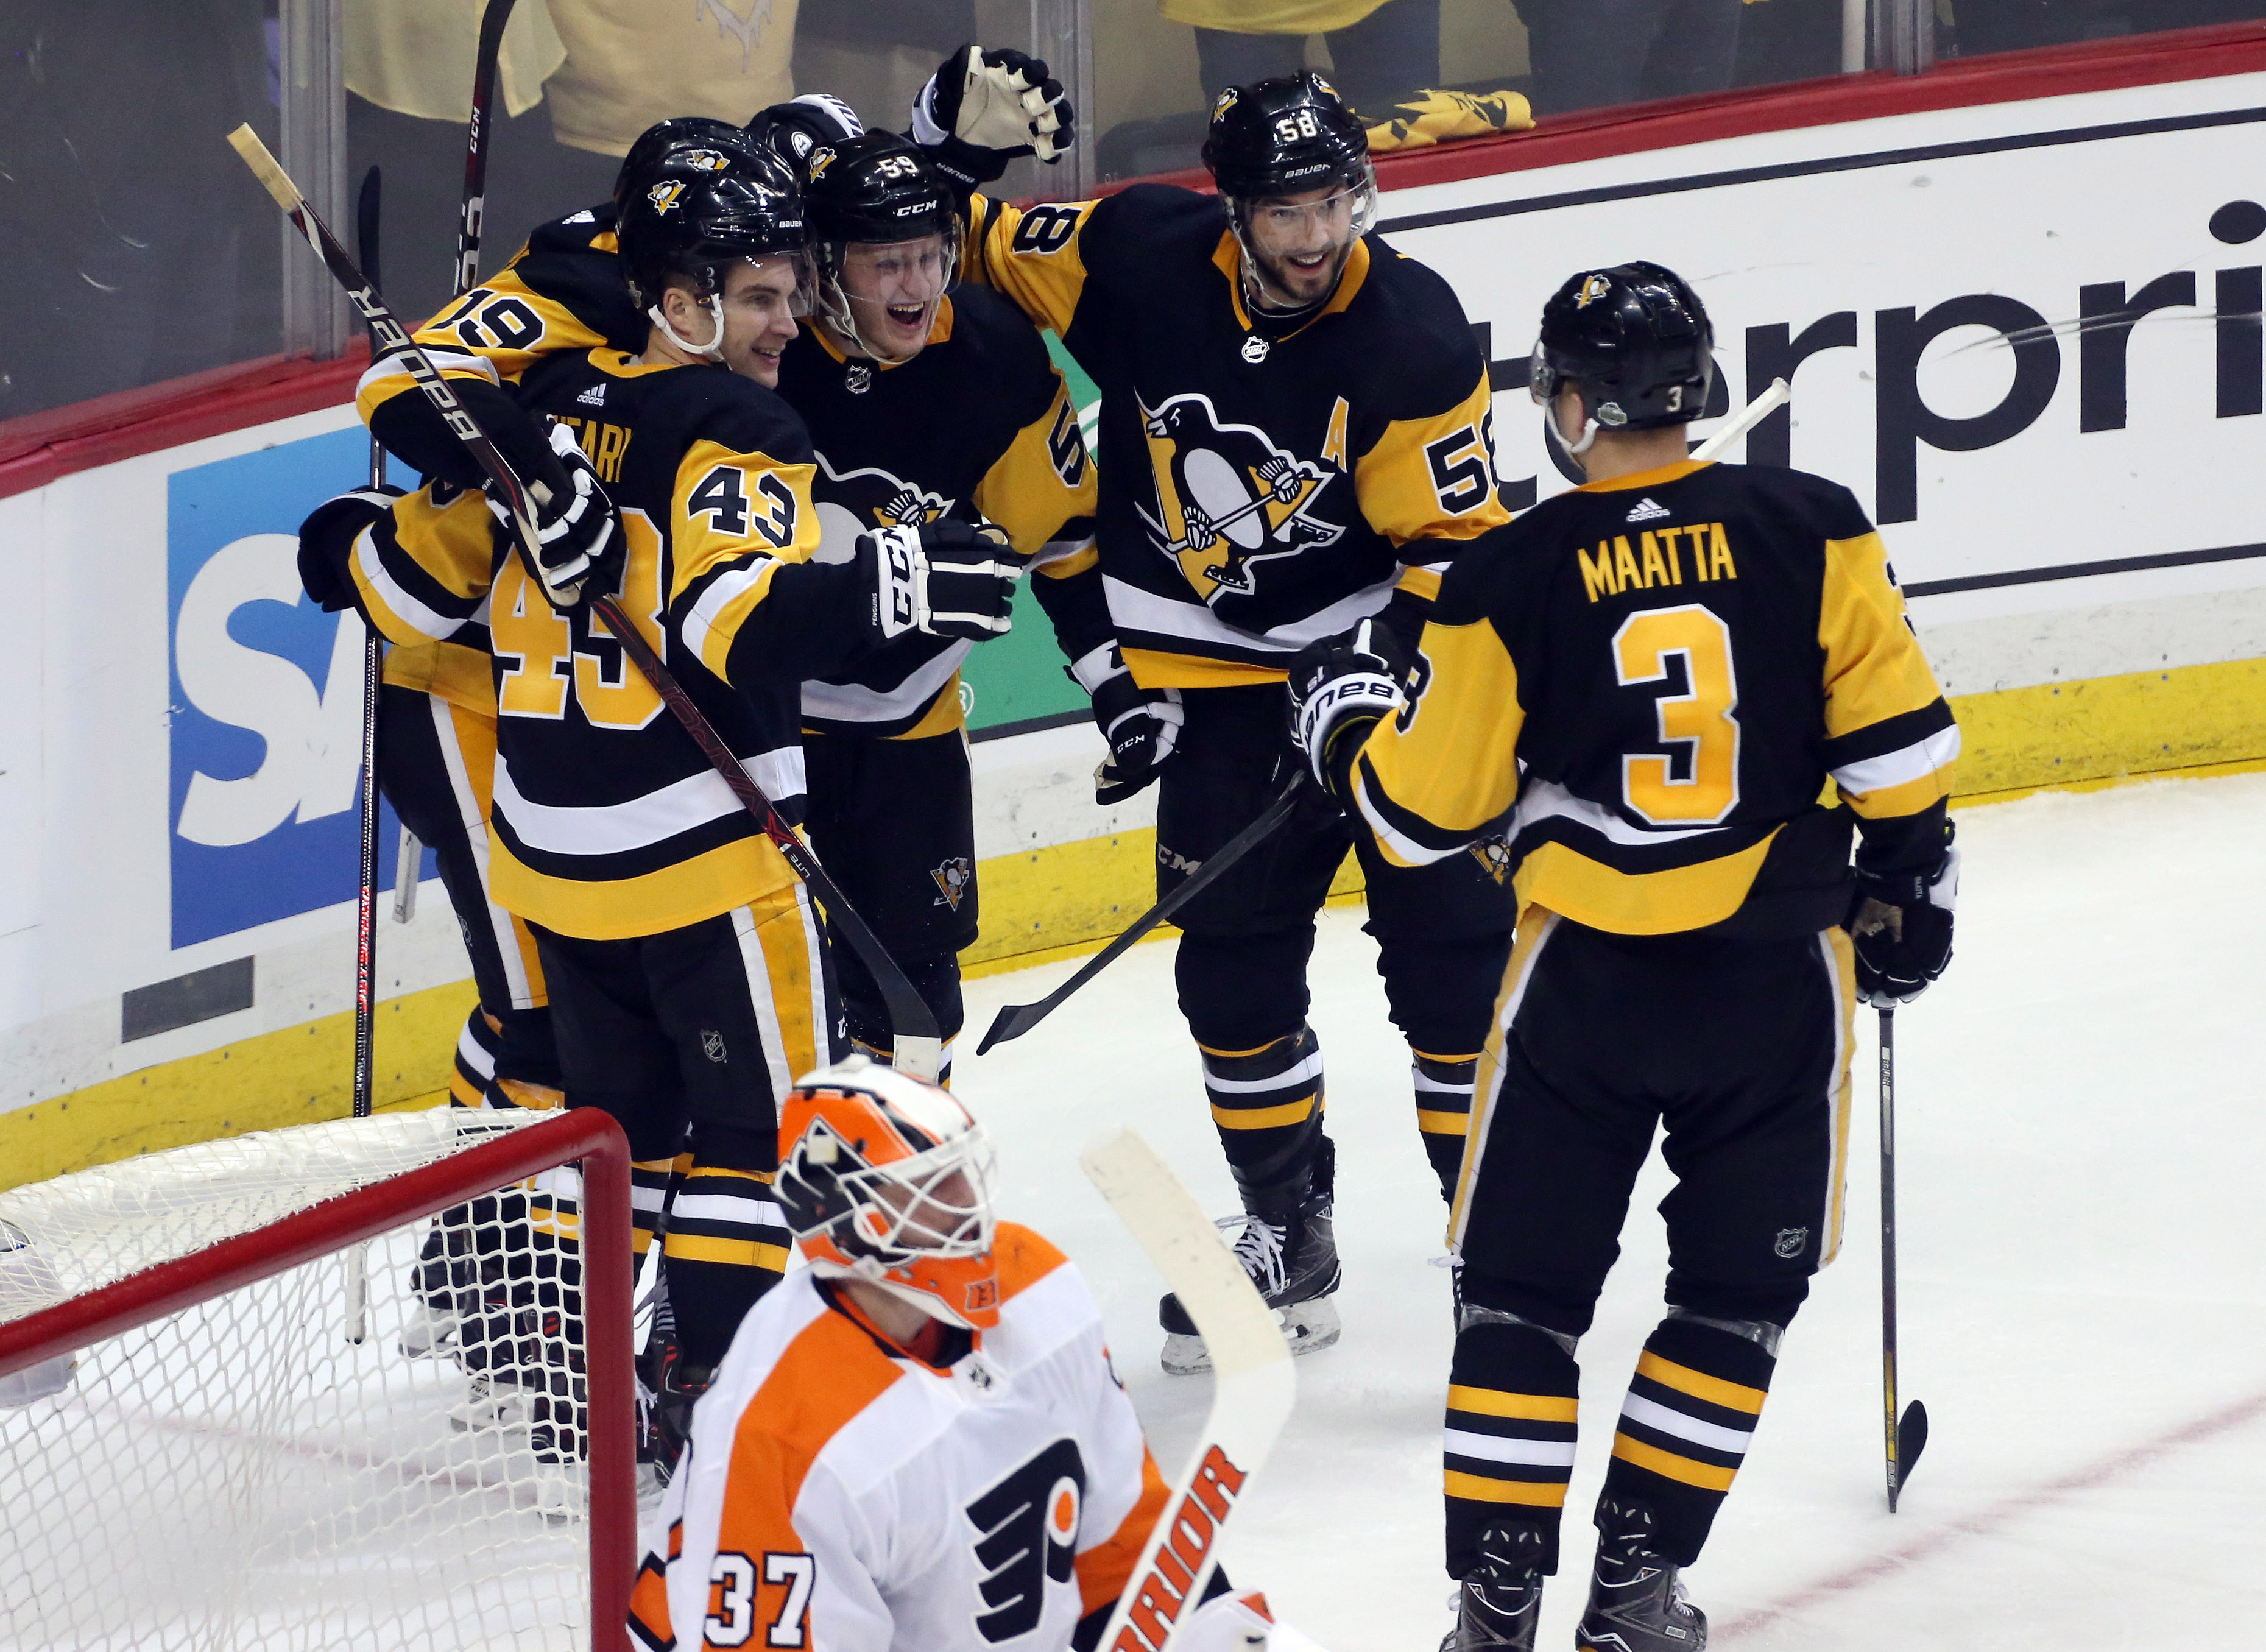 Losing by a Touchdown: Five failures of the Flyers in their 7-0 Game One Loss